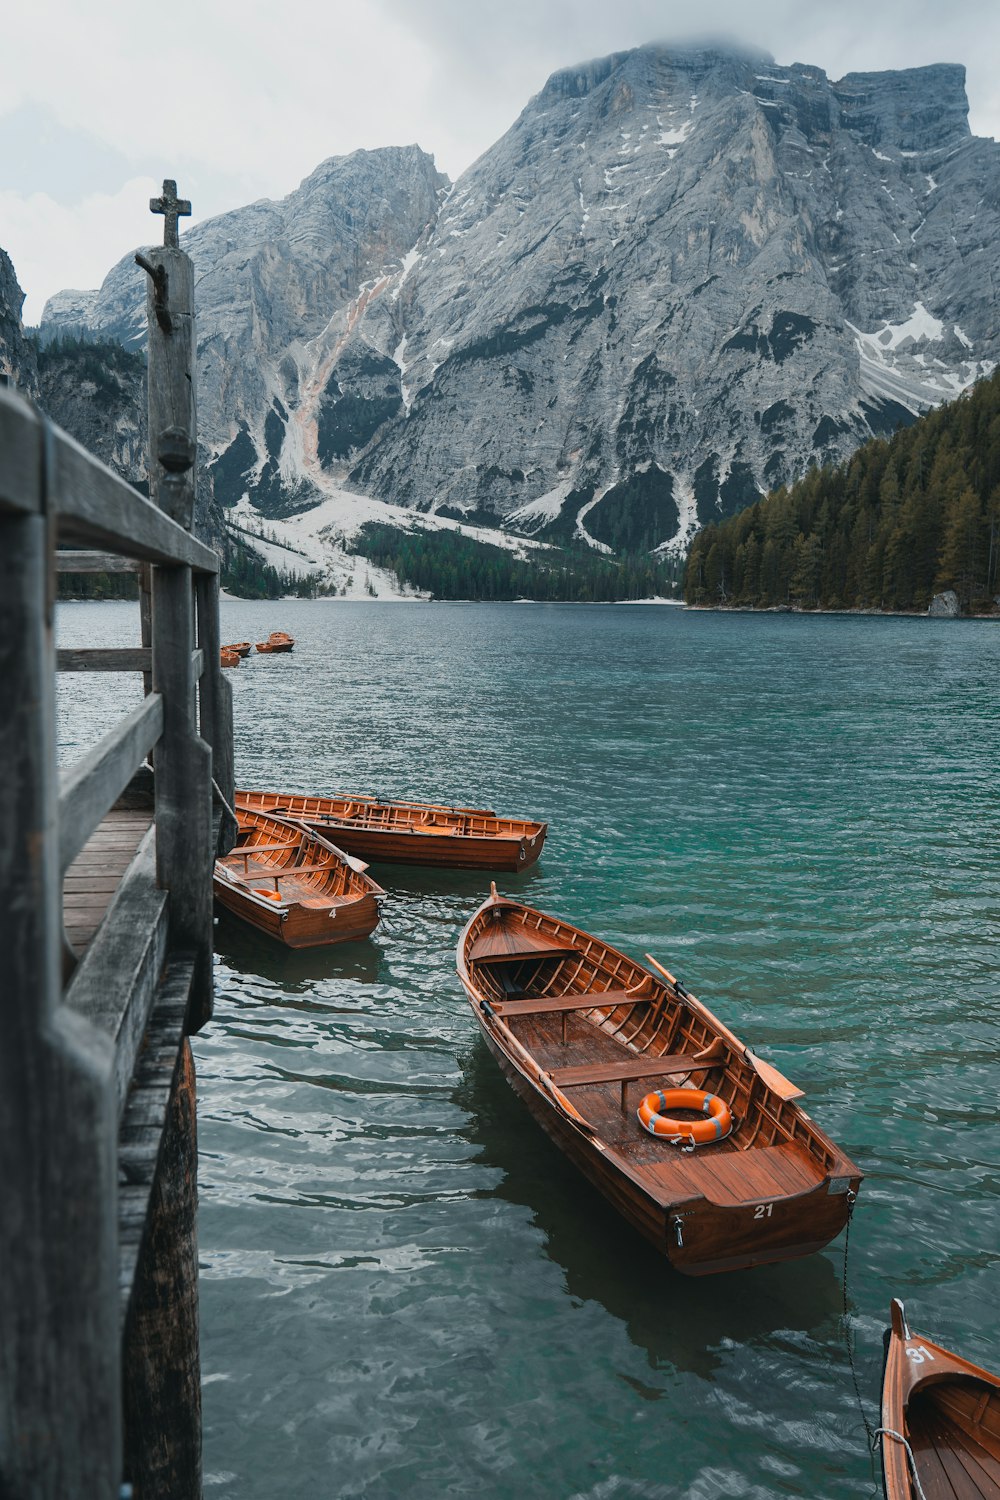 a group of boats in a body of water with mountains in the background